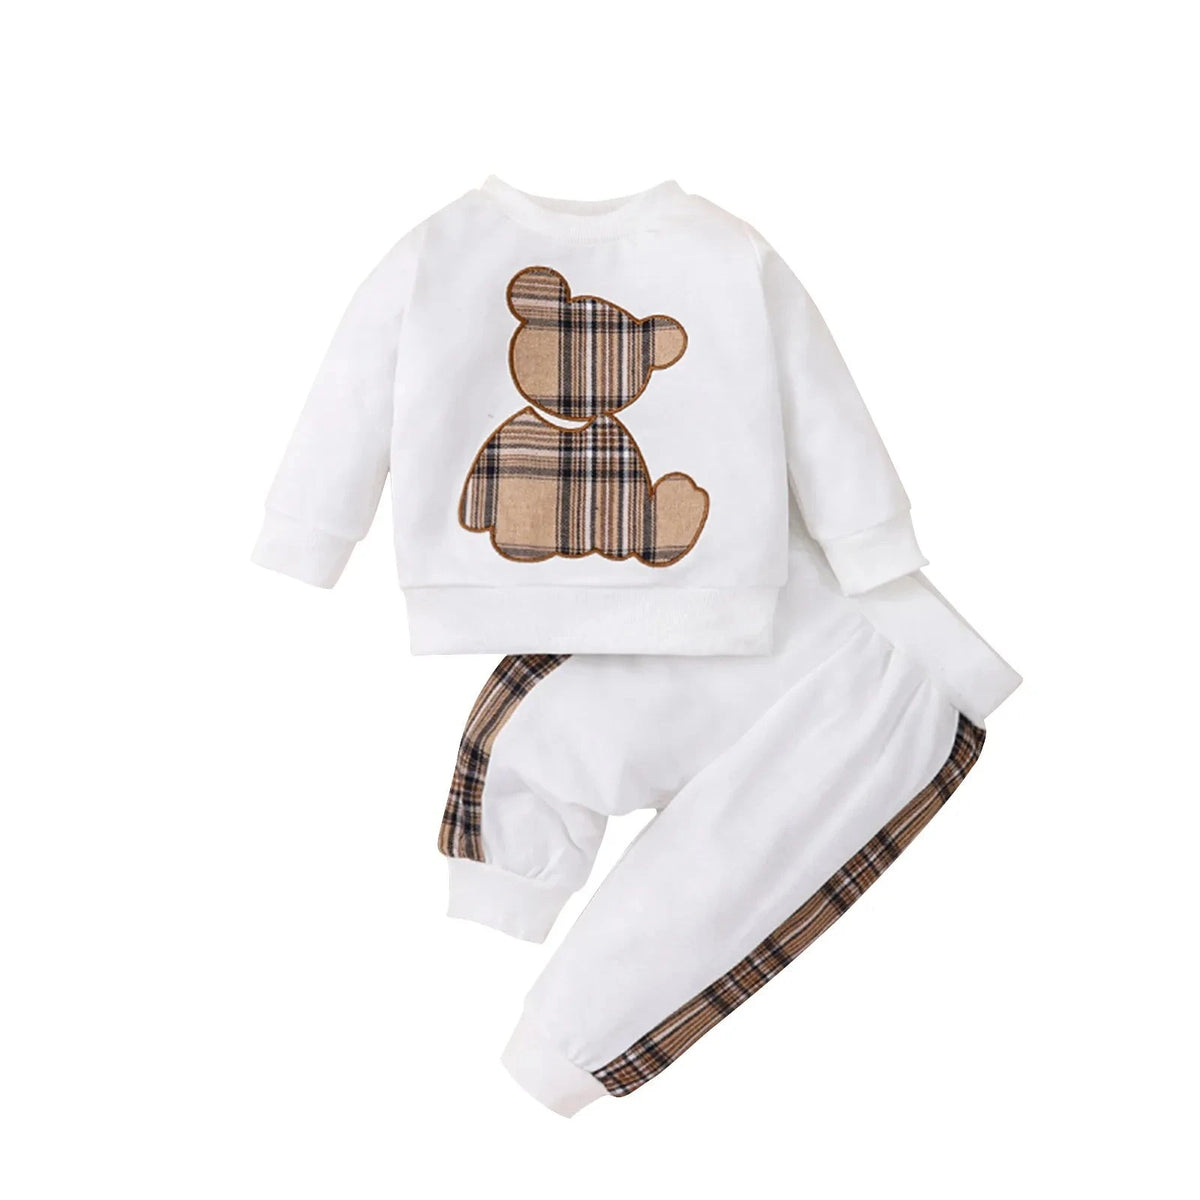 Cute and comfortable baby sweatshirt set - For all baby